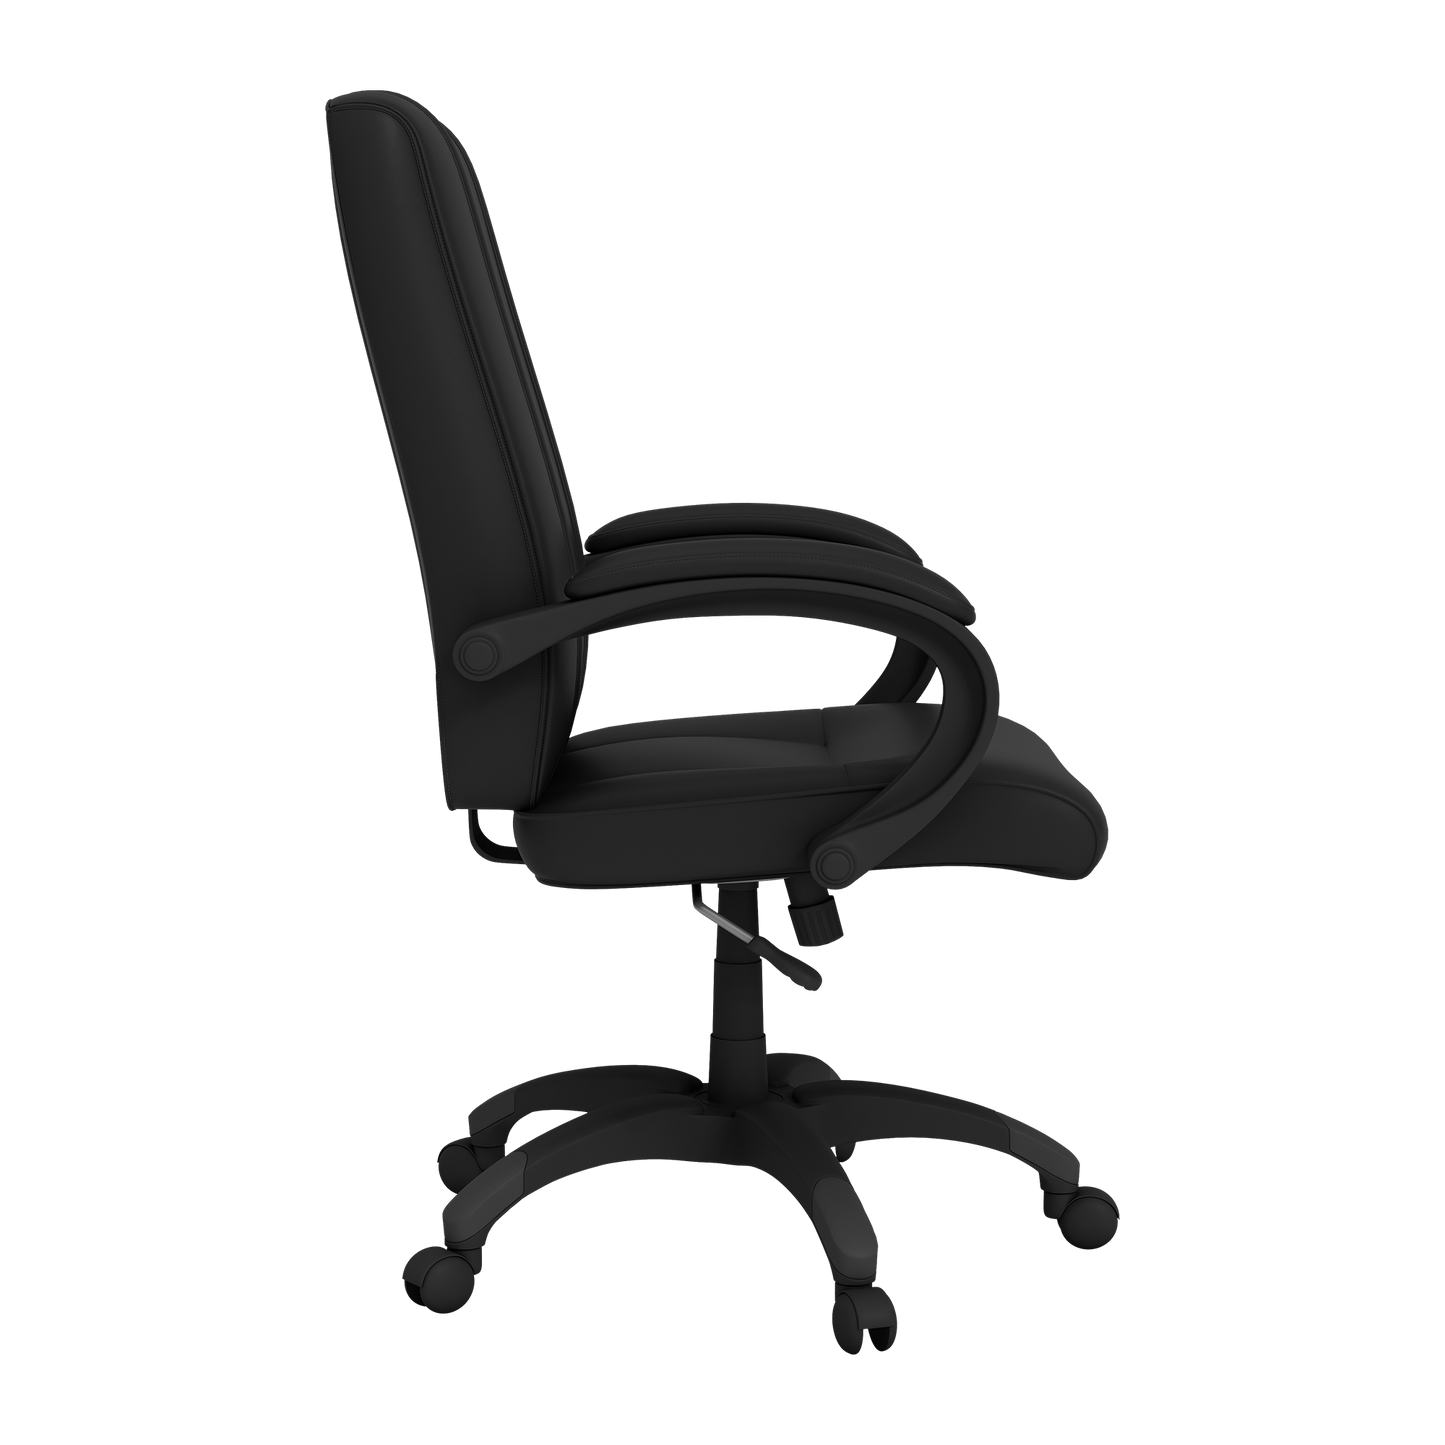 Office Chair 1000 with Chevy Racing Logo